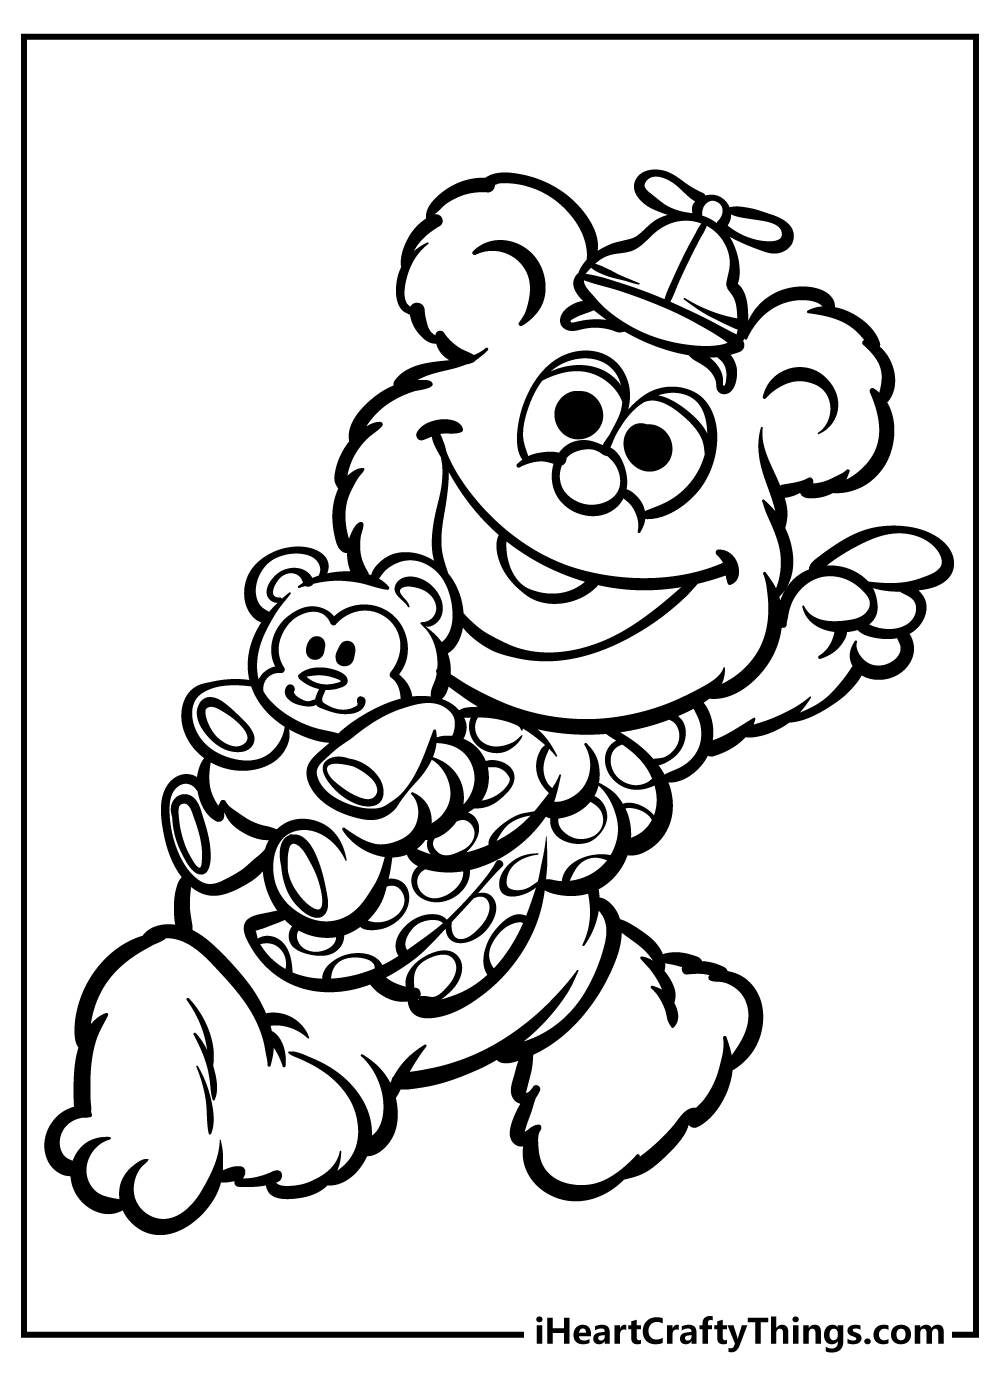 Muppet Babies Coloring Sheet for children free download